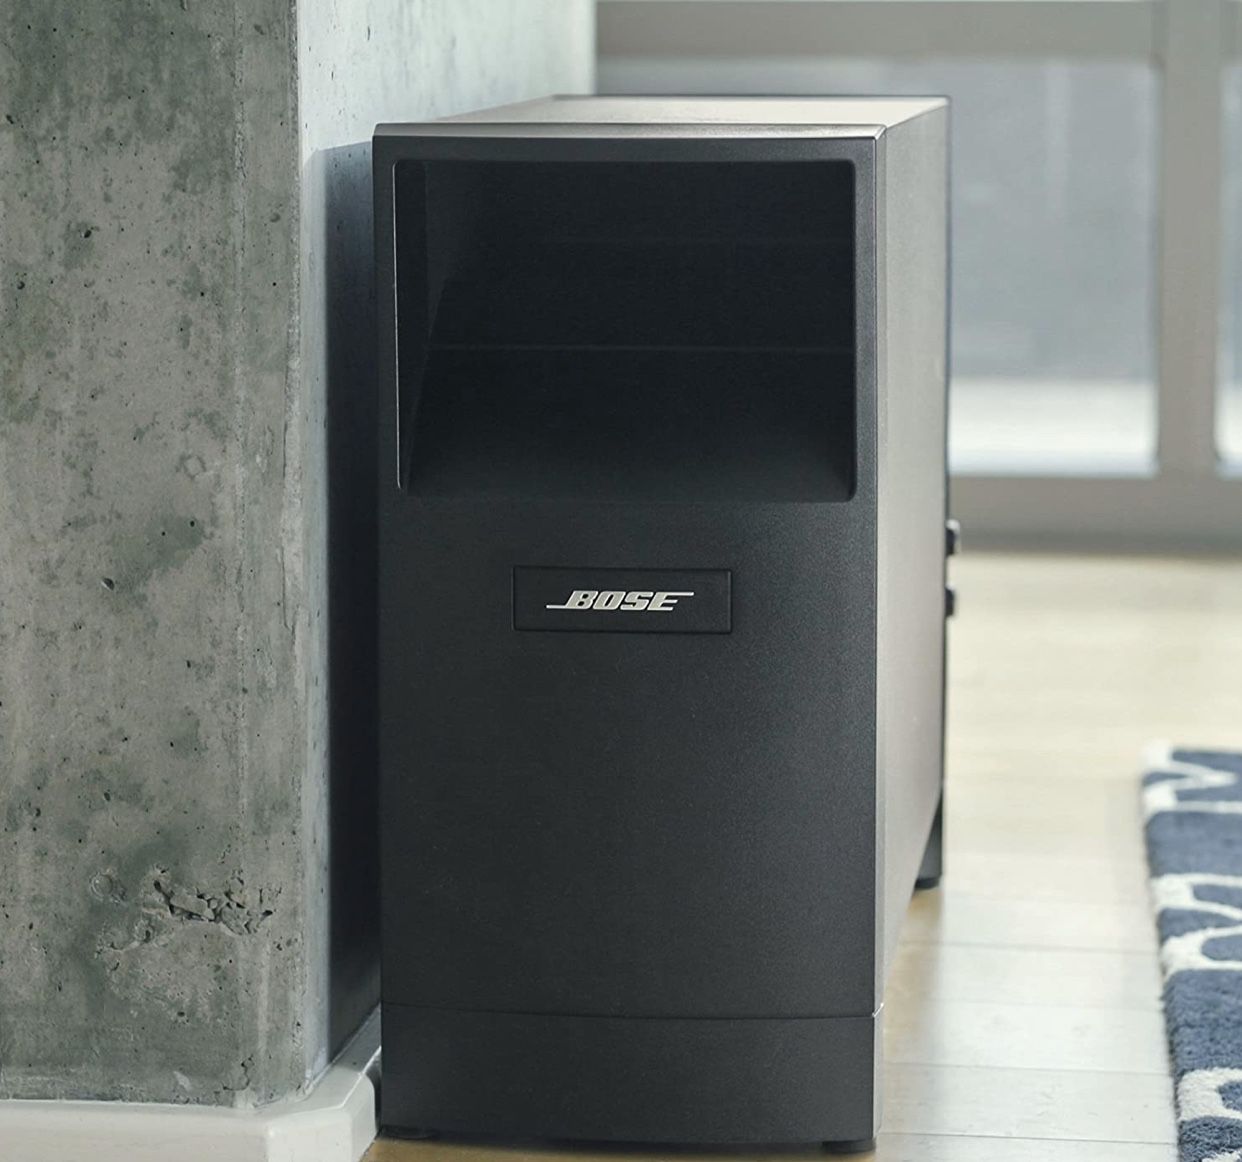 Bose acoustimass 6 series V 5.1 Home Theater System